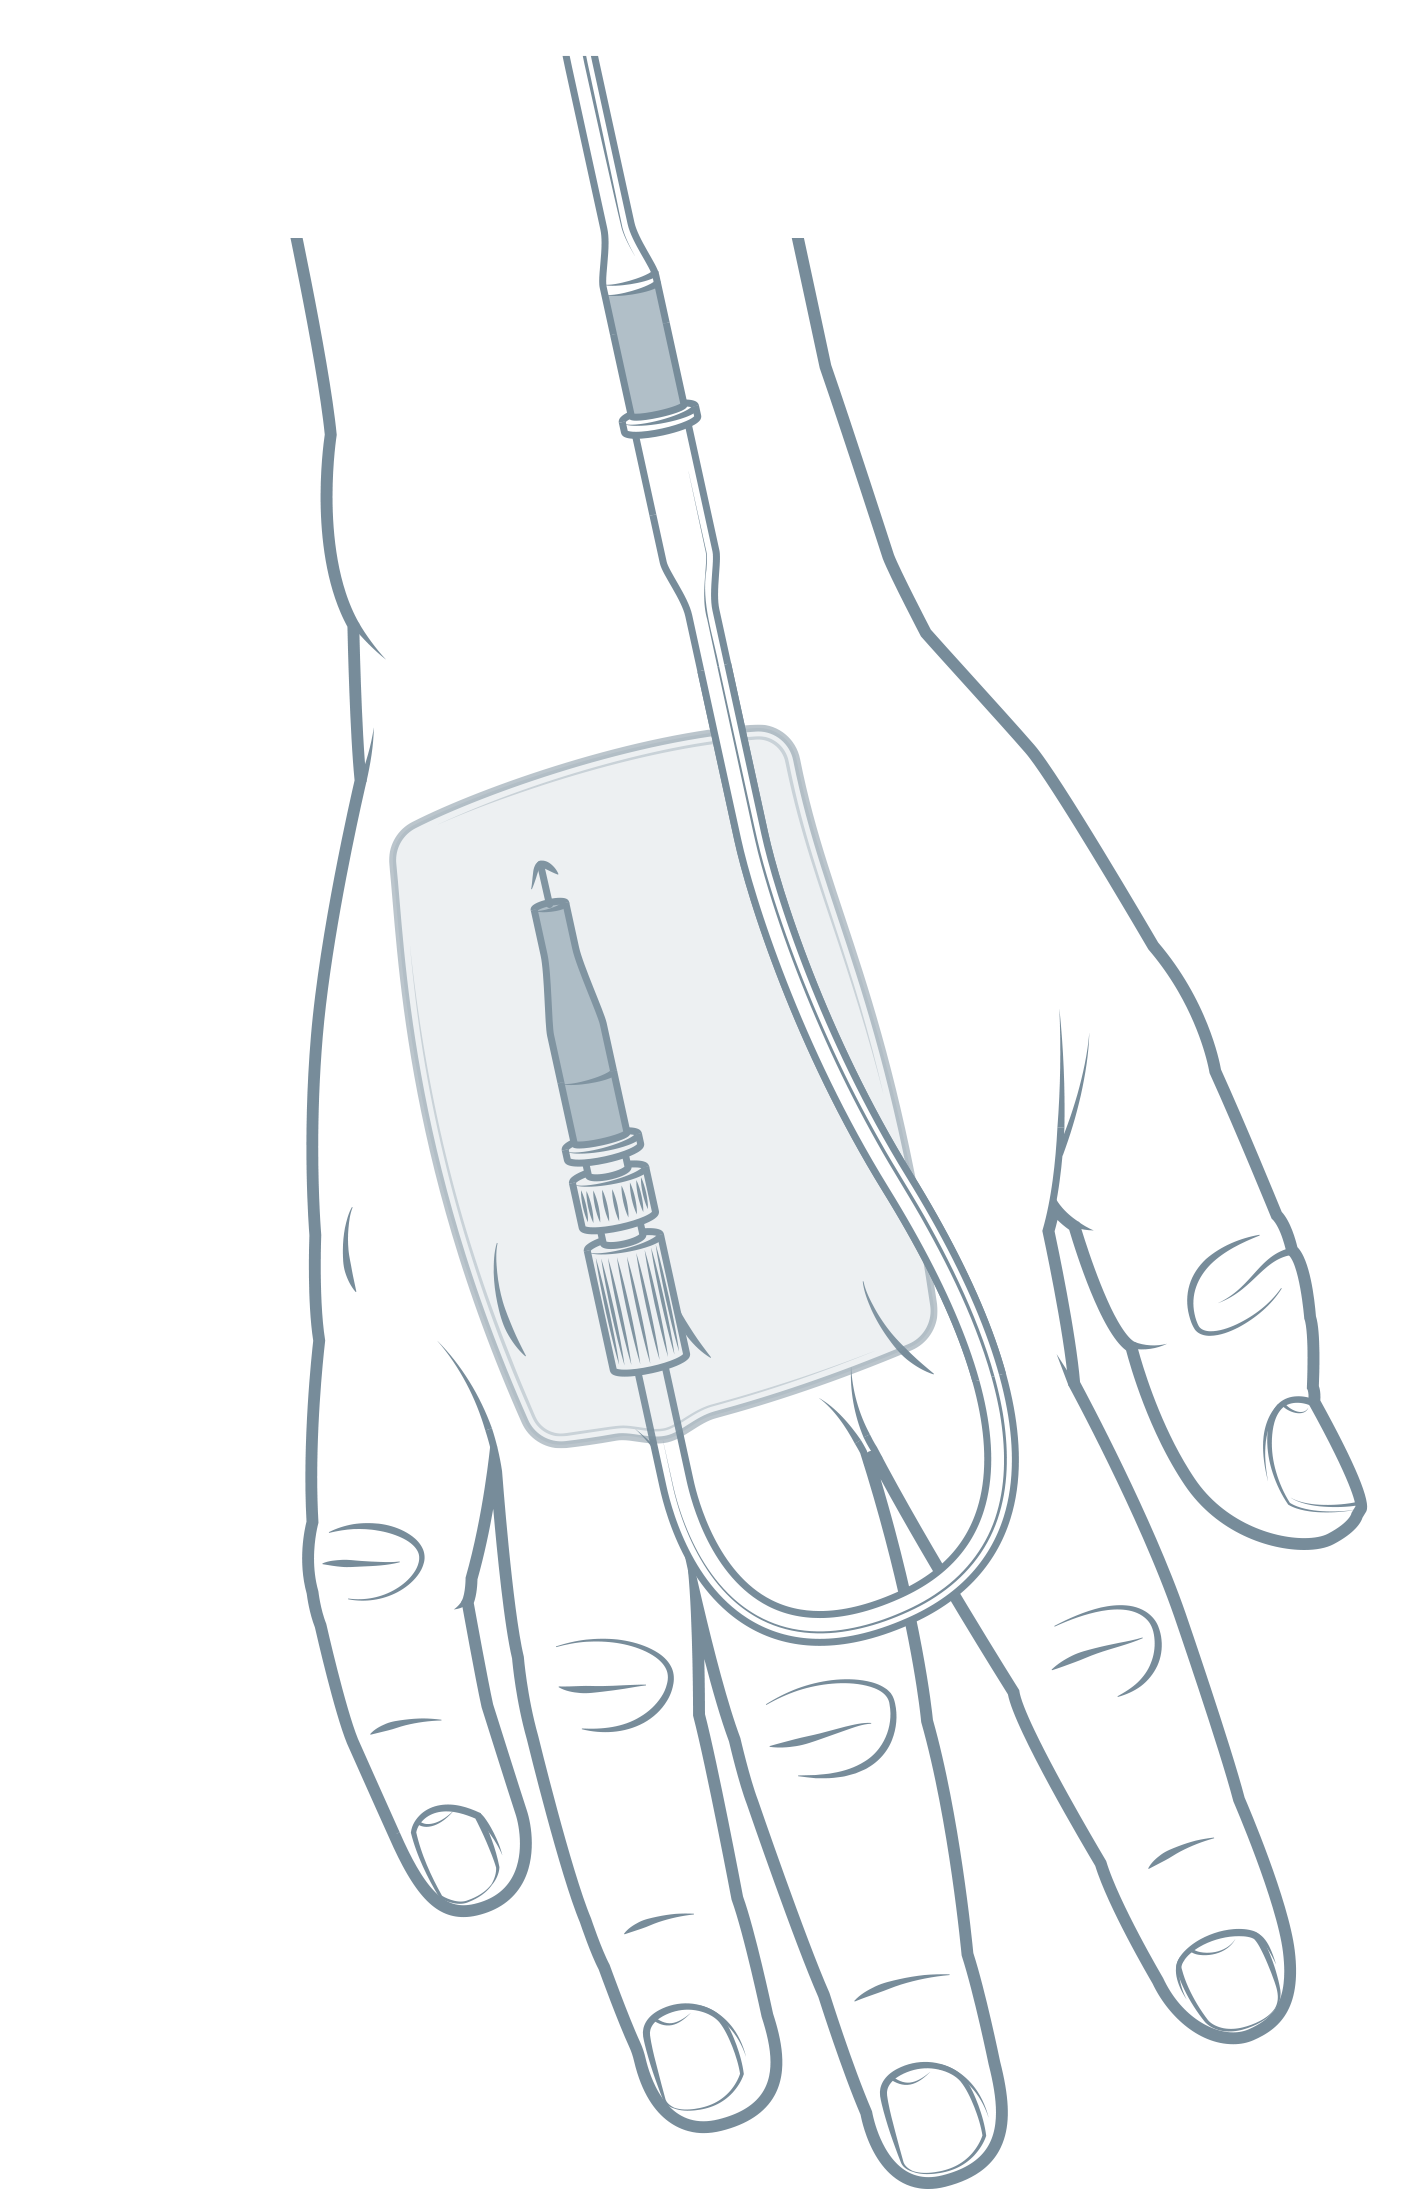 iv infection prevention